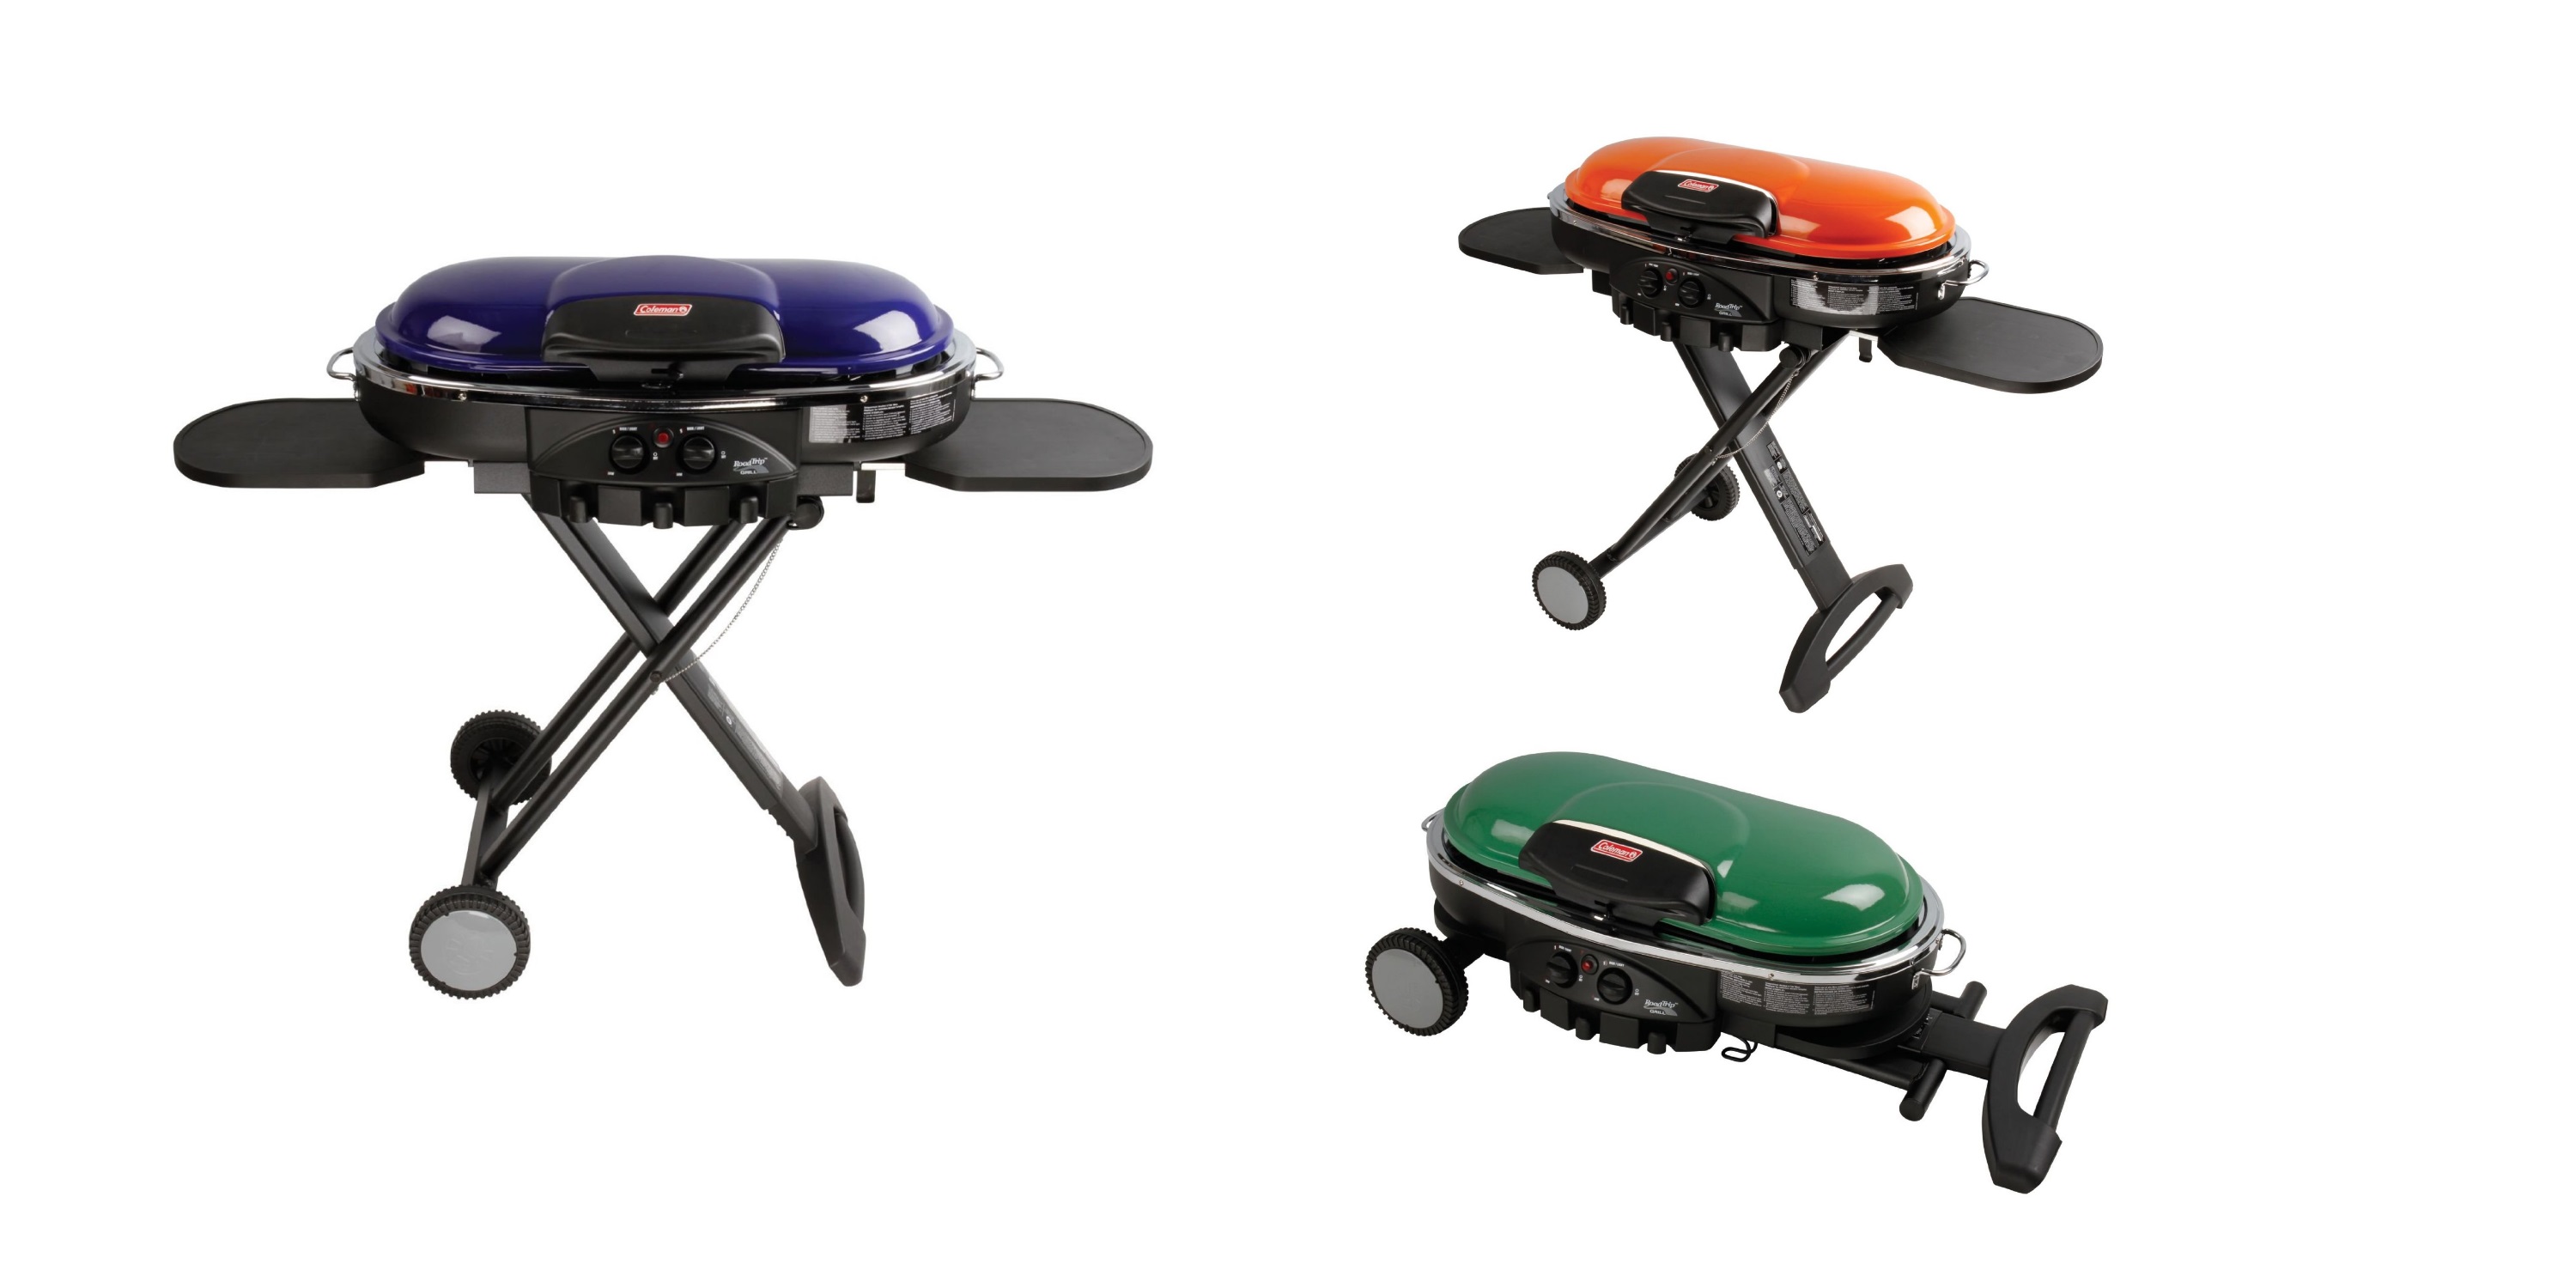 Coleman Road Trip Propane Portable Grill LXE—$124.99 Today ONLY!